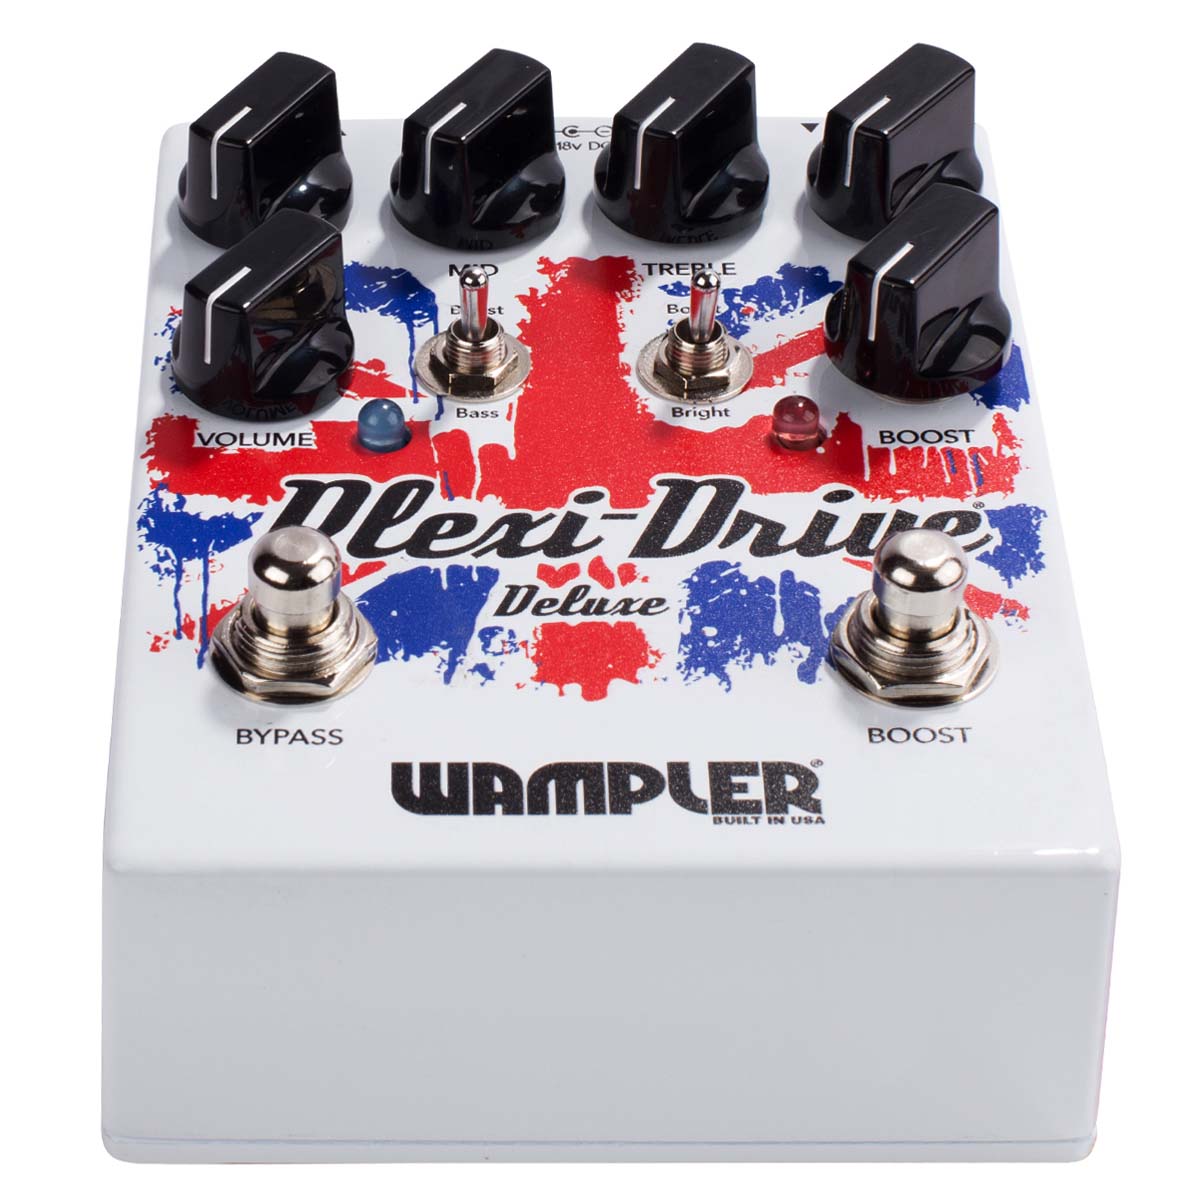 Wampler Pedals Plexi-Drive Deluxe Guitar Effects Pedal